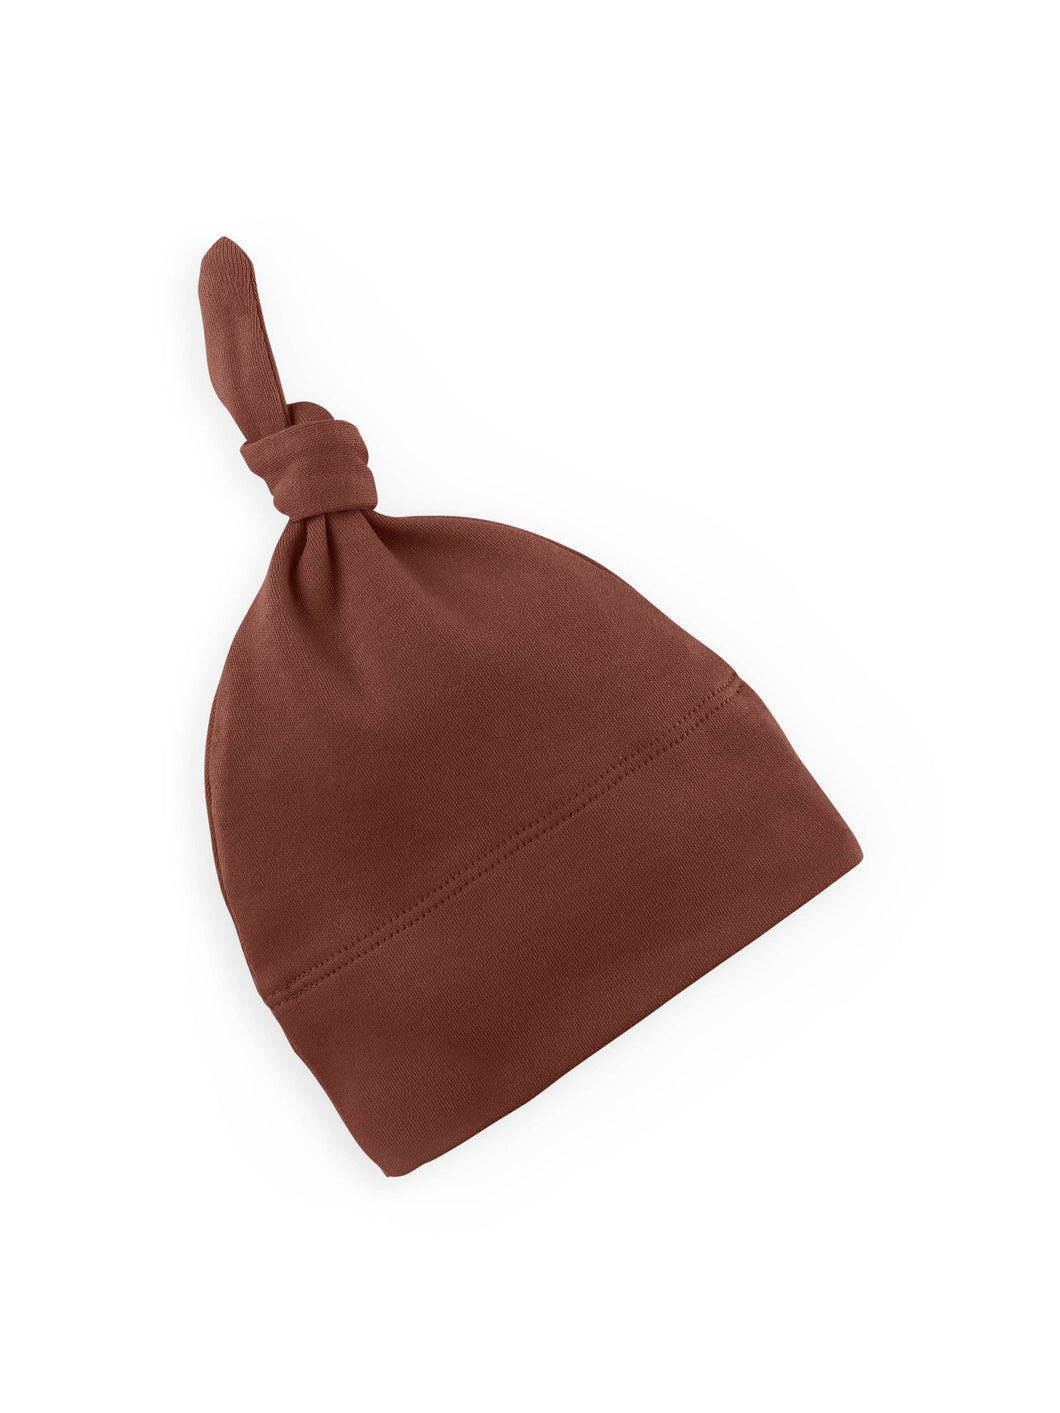 Colored Organics - Organic Baby Classic Knotted Hat - Sumac